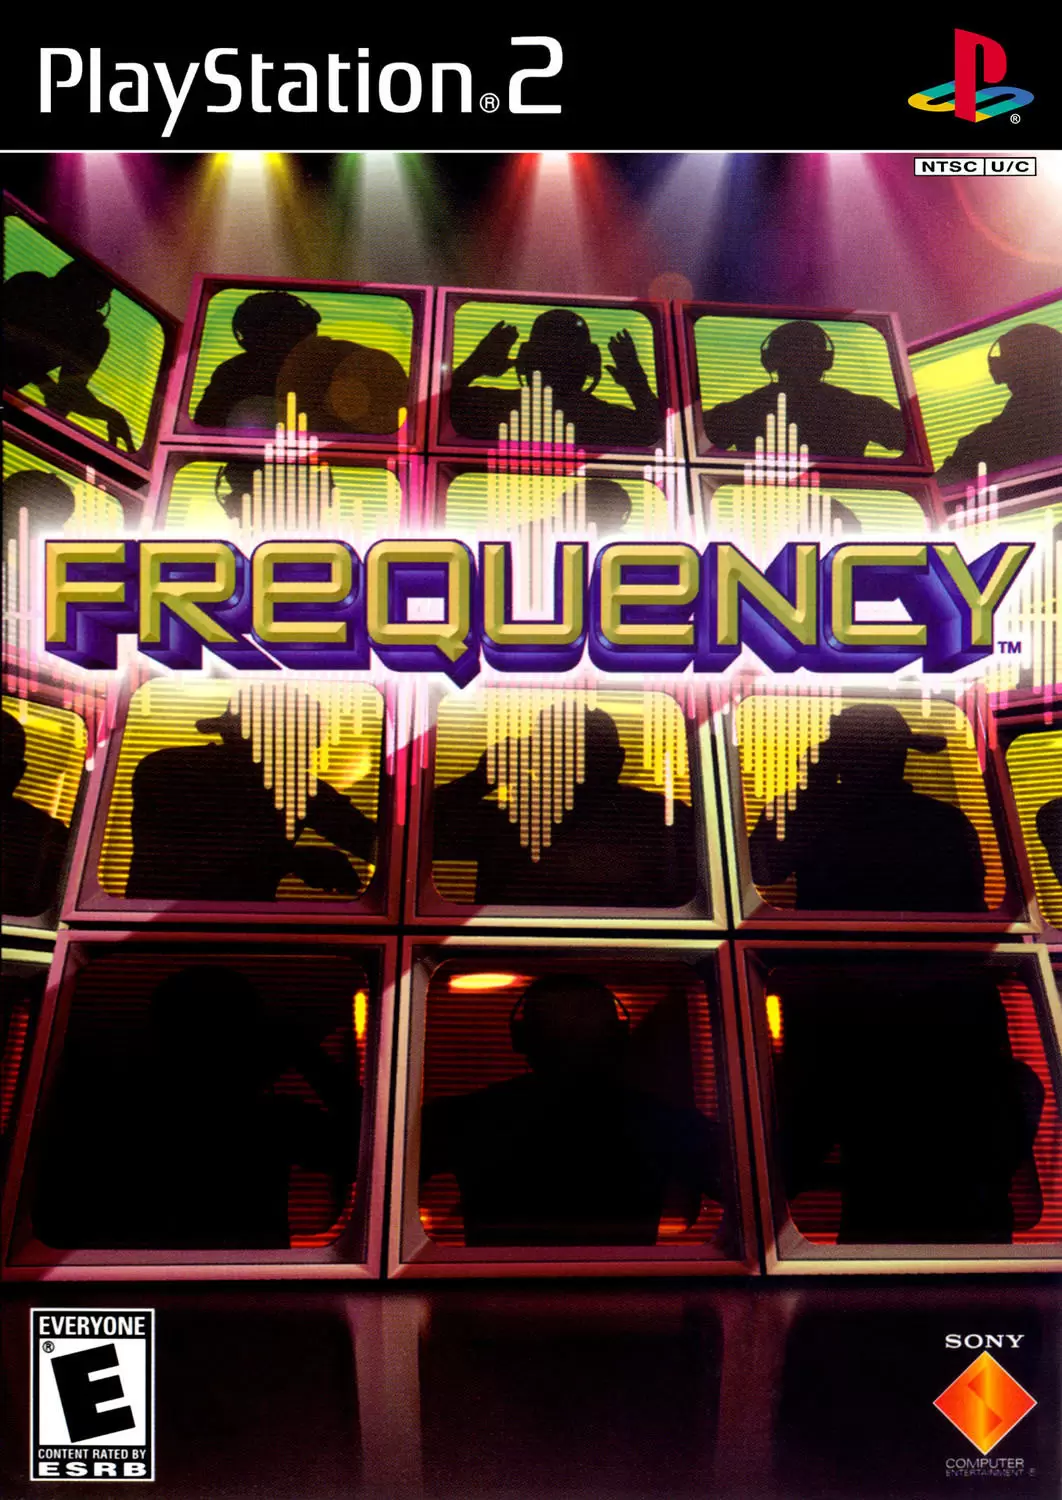 PS2 Games - Frequency